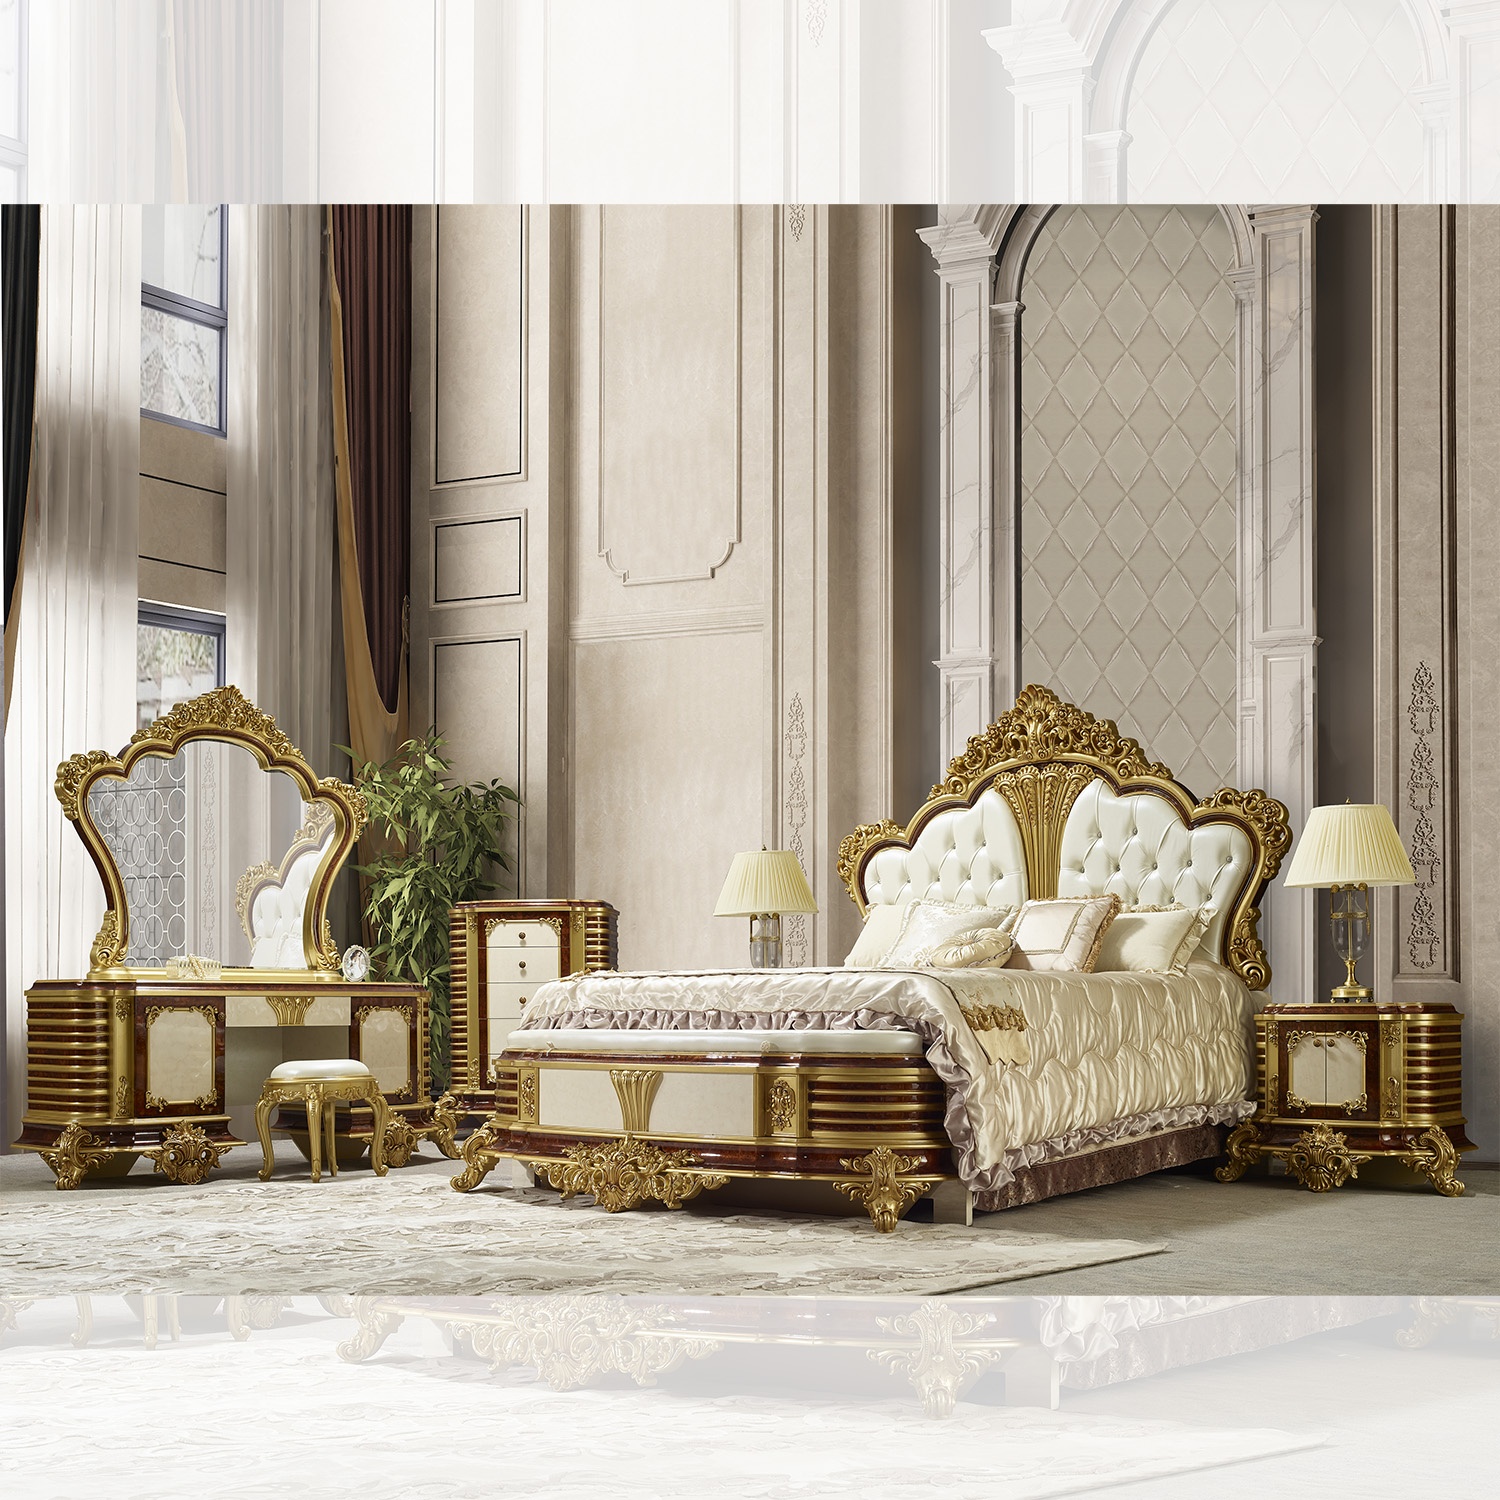 Roya bedroom set in luxury gold color with classic Italian carving - carved in India -Brand Royalzig Luxury Furniture